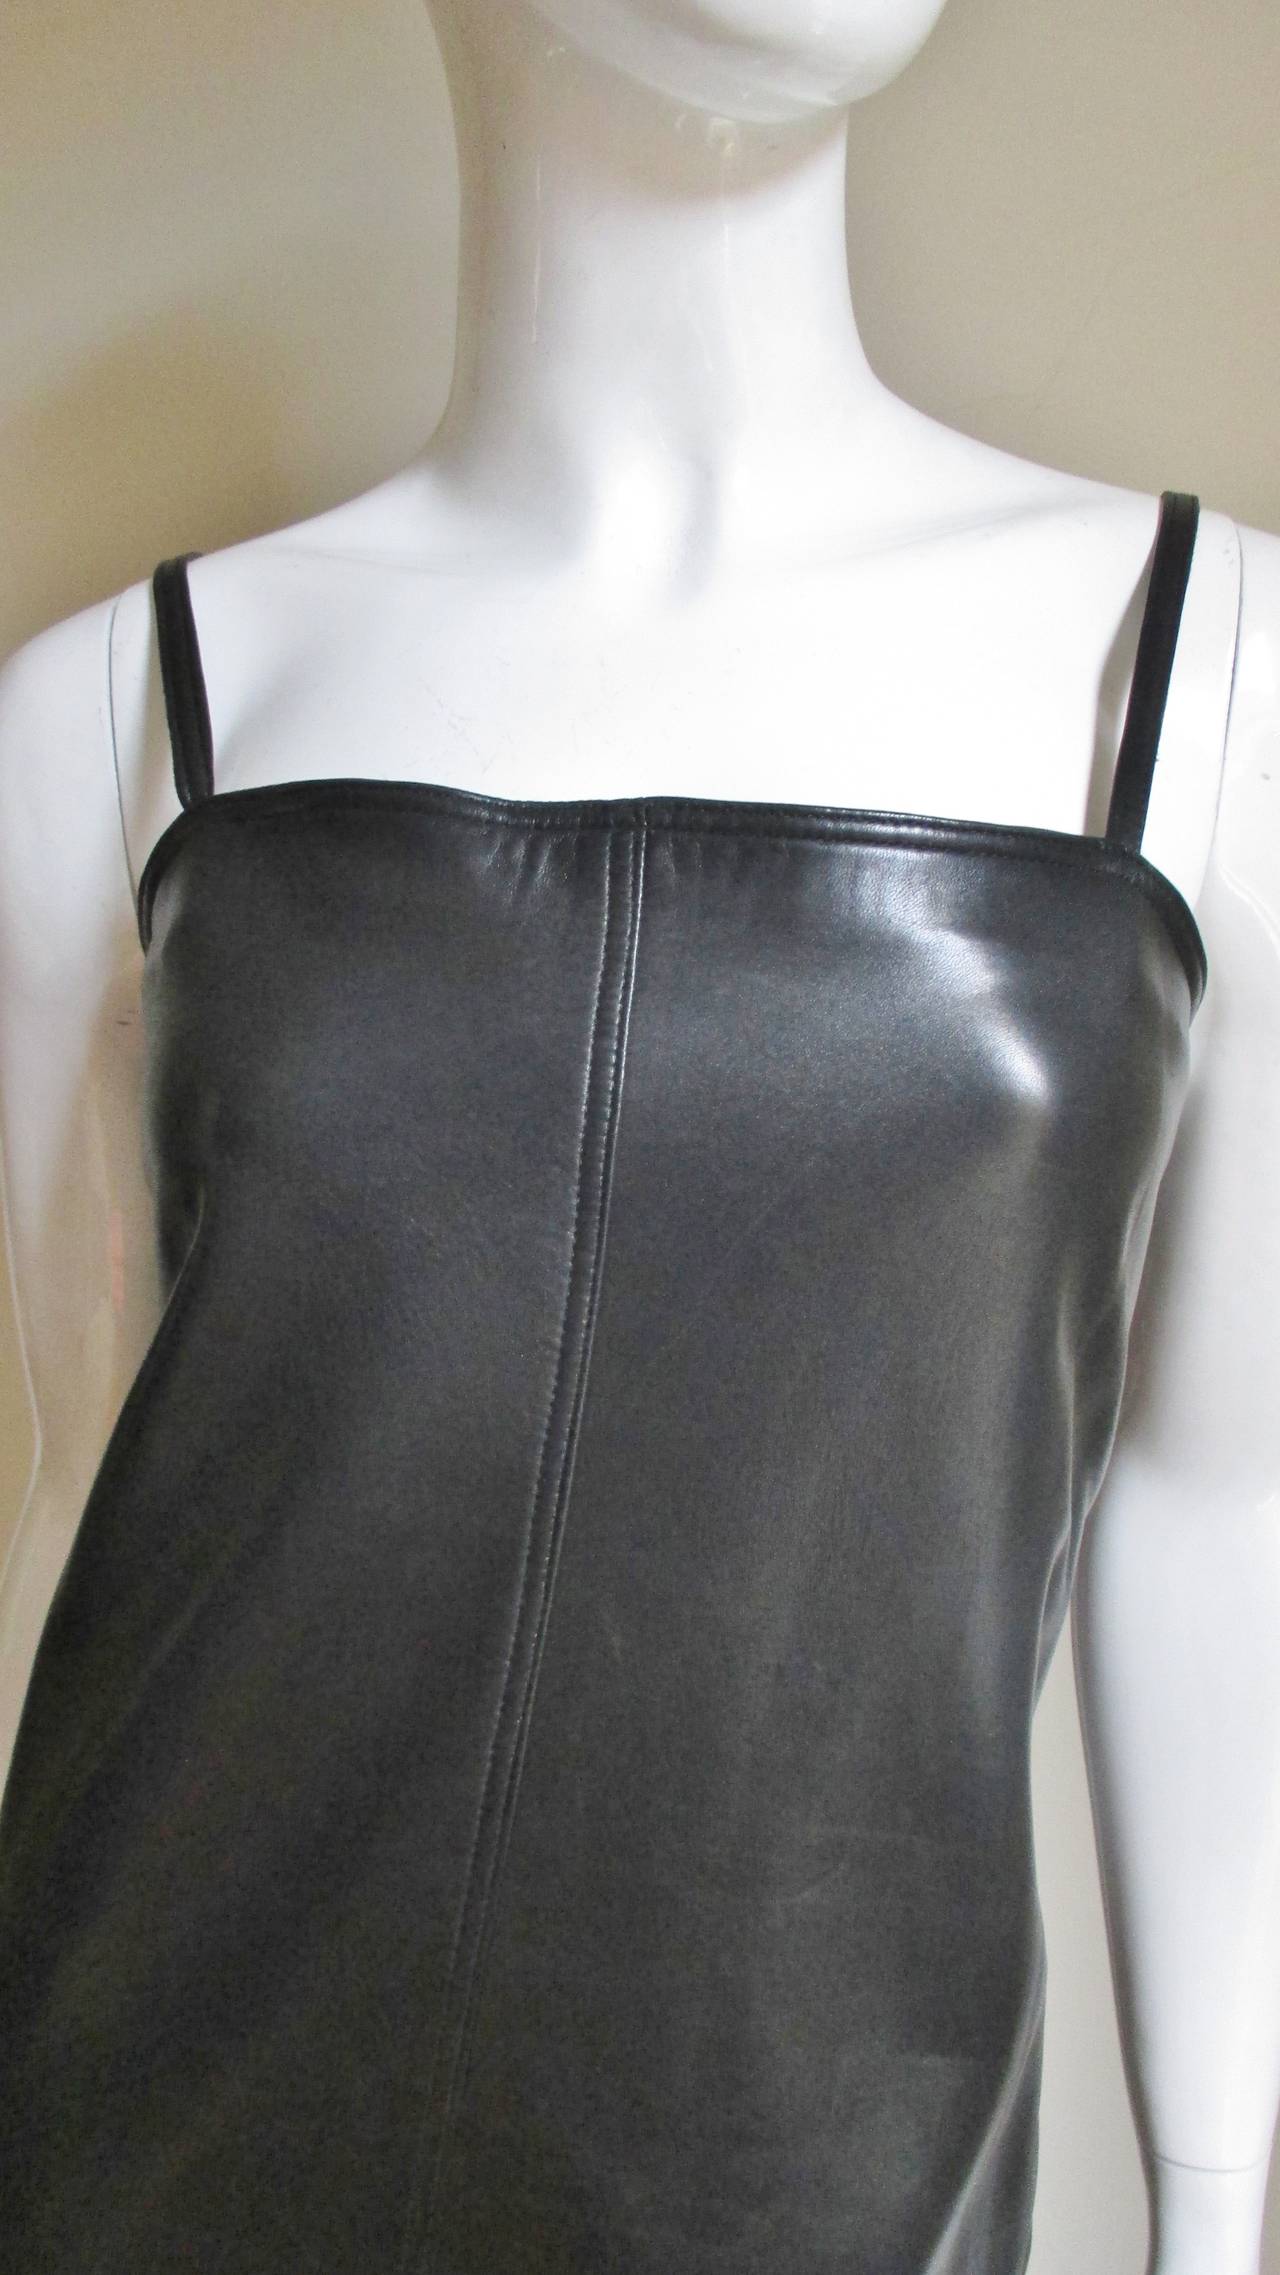 Soft, supple black leather dress with straps and 2